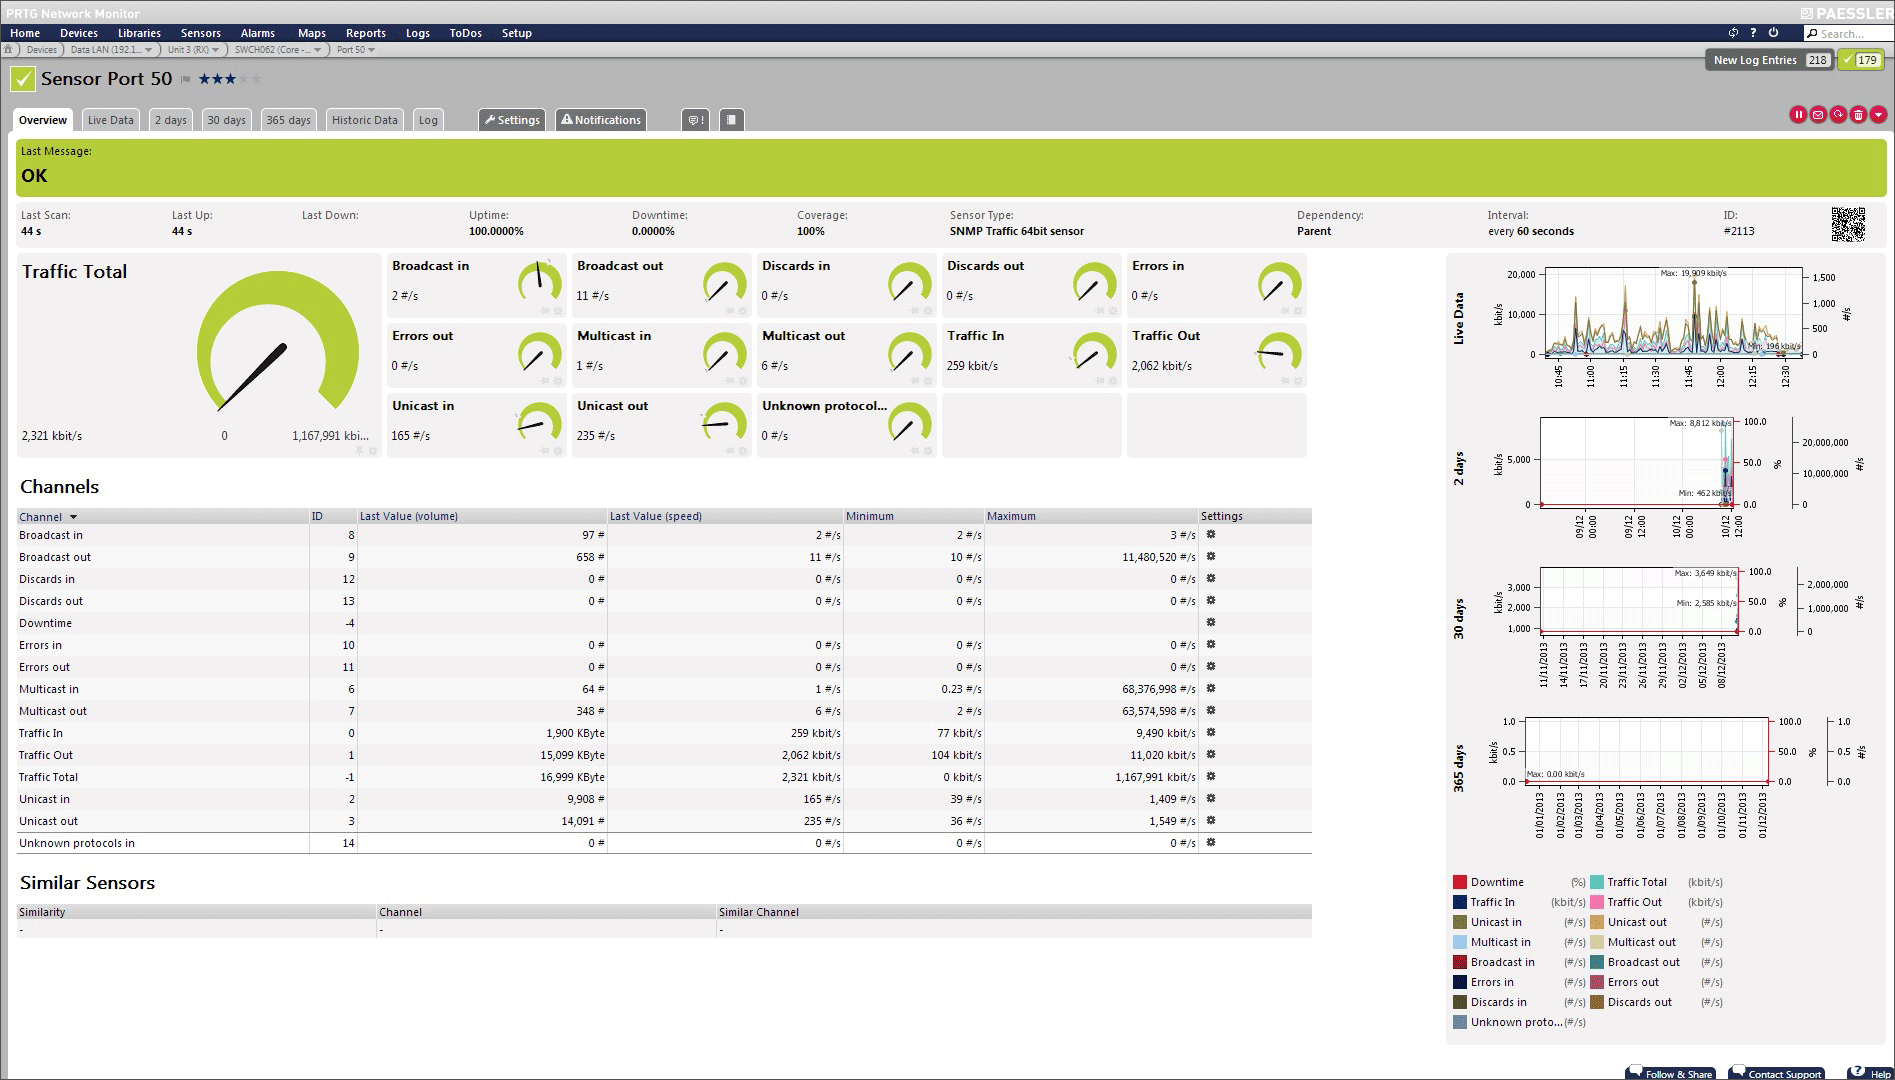 Sensor channel overview page